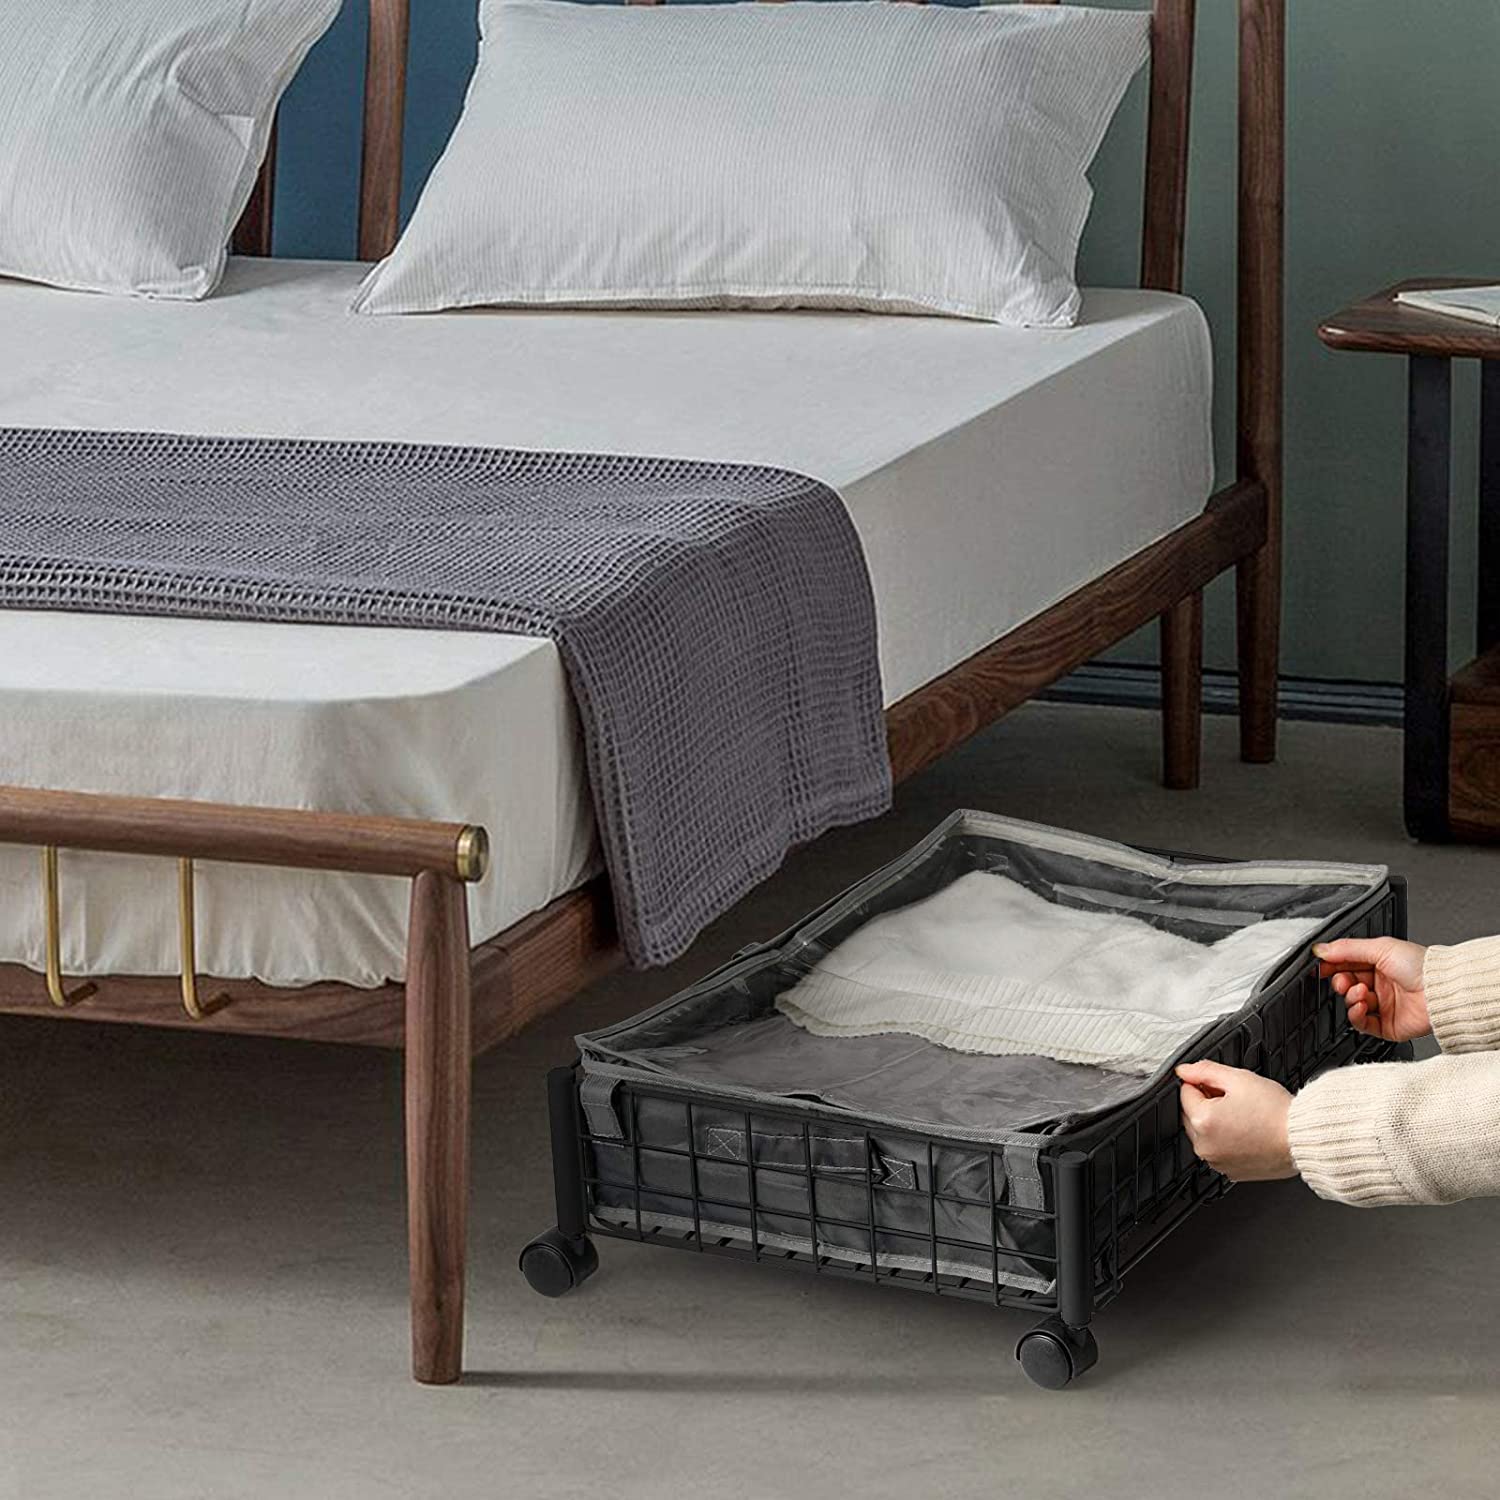 10 Best Under Bed Storage With Wheels For 2023